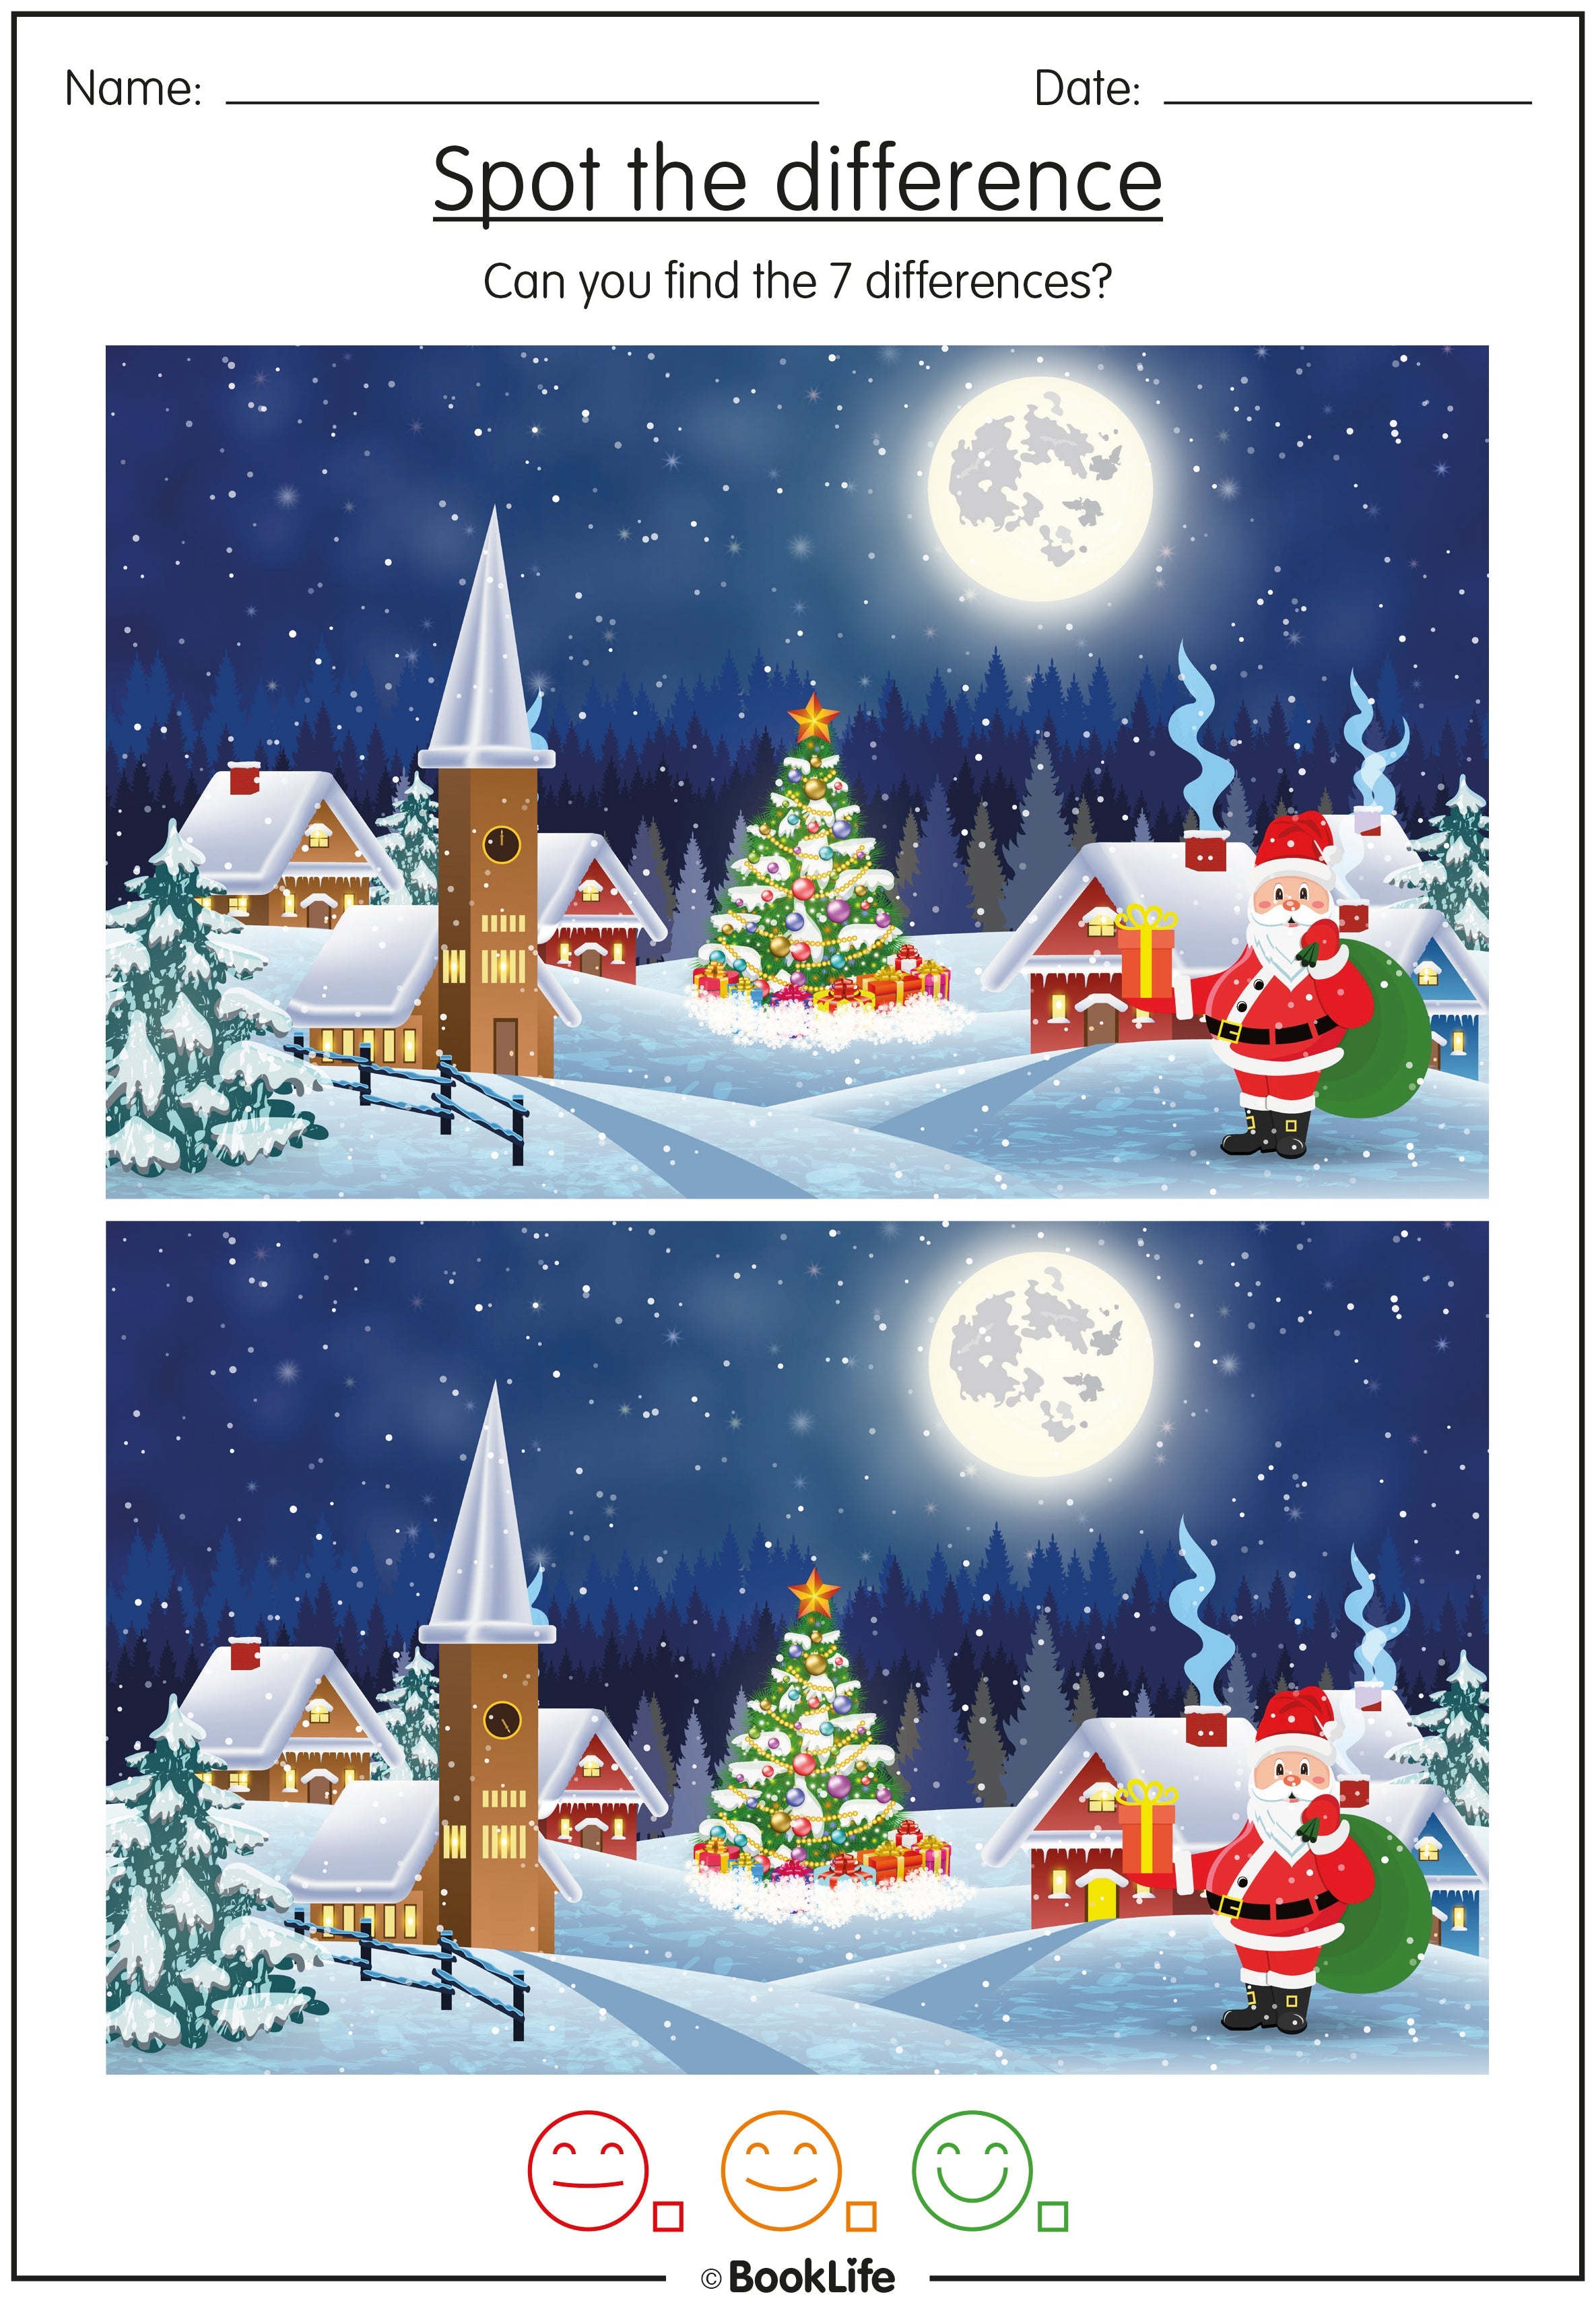 Christmas Spot The Difference Activity Sheet by BookLife